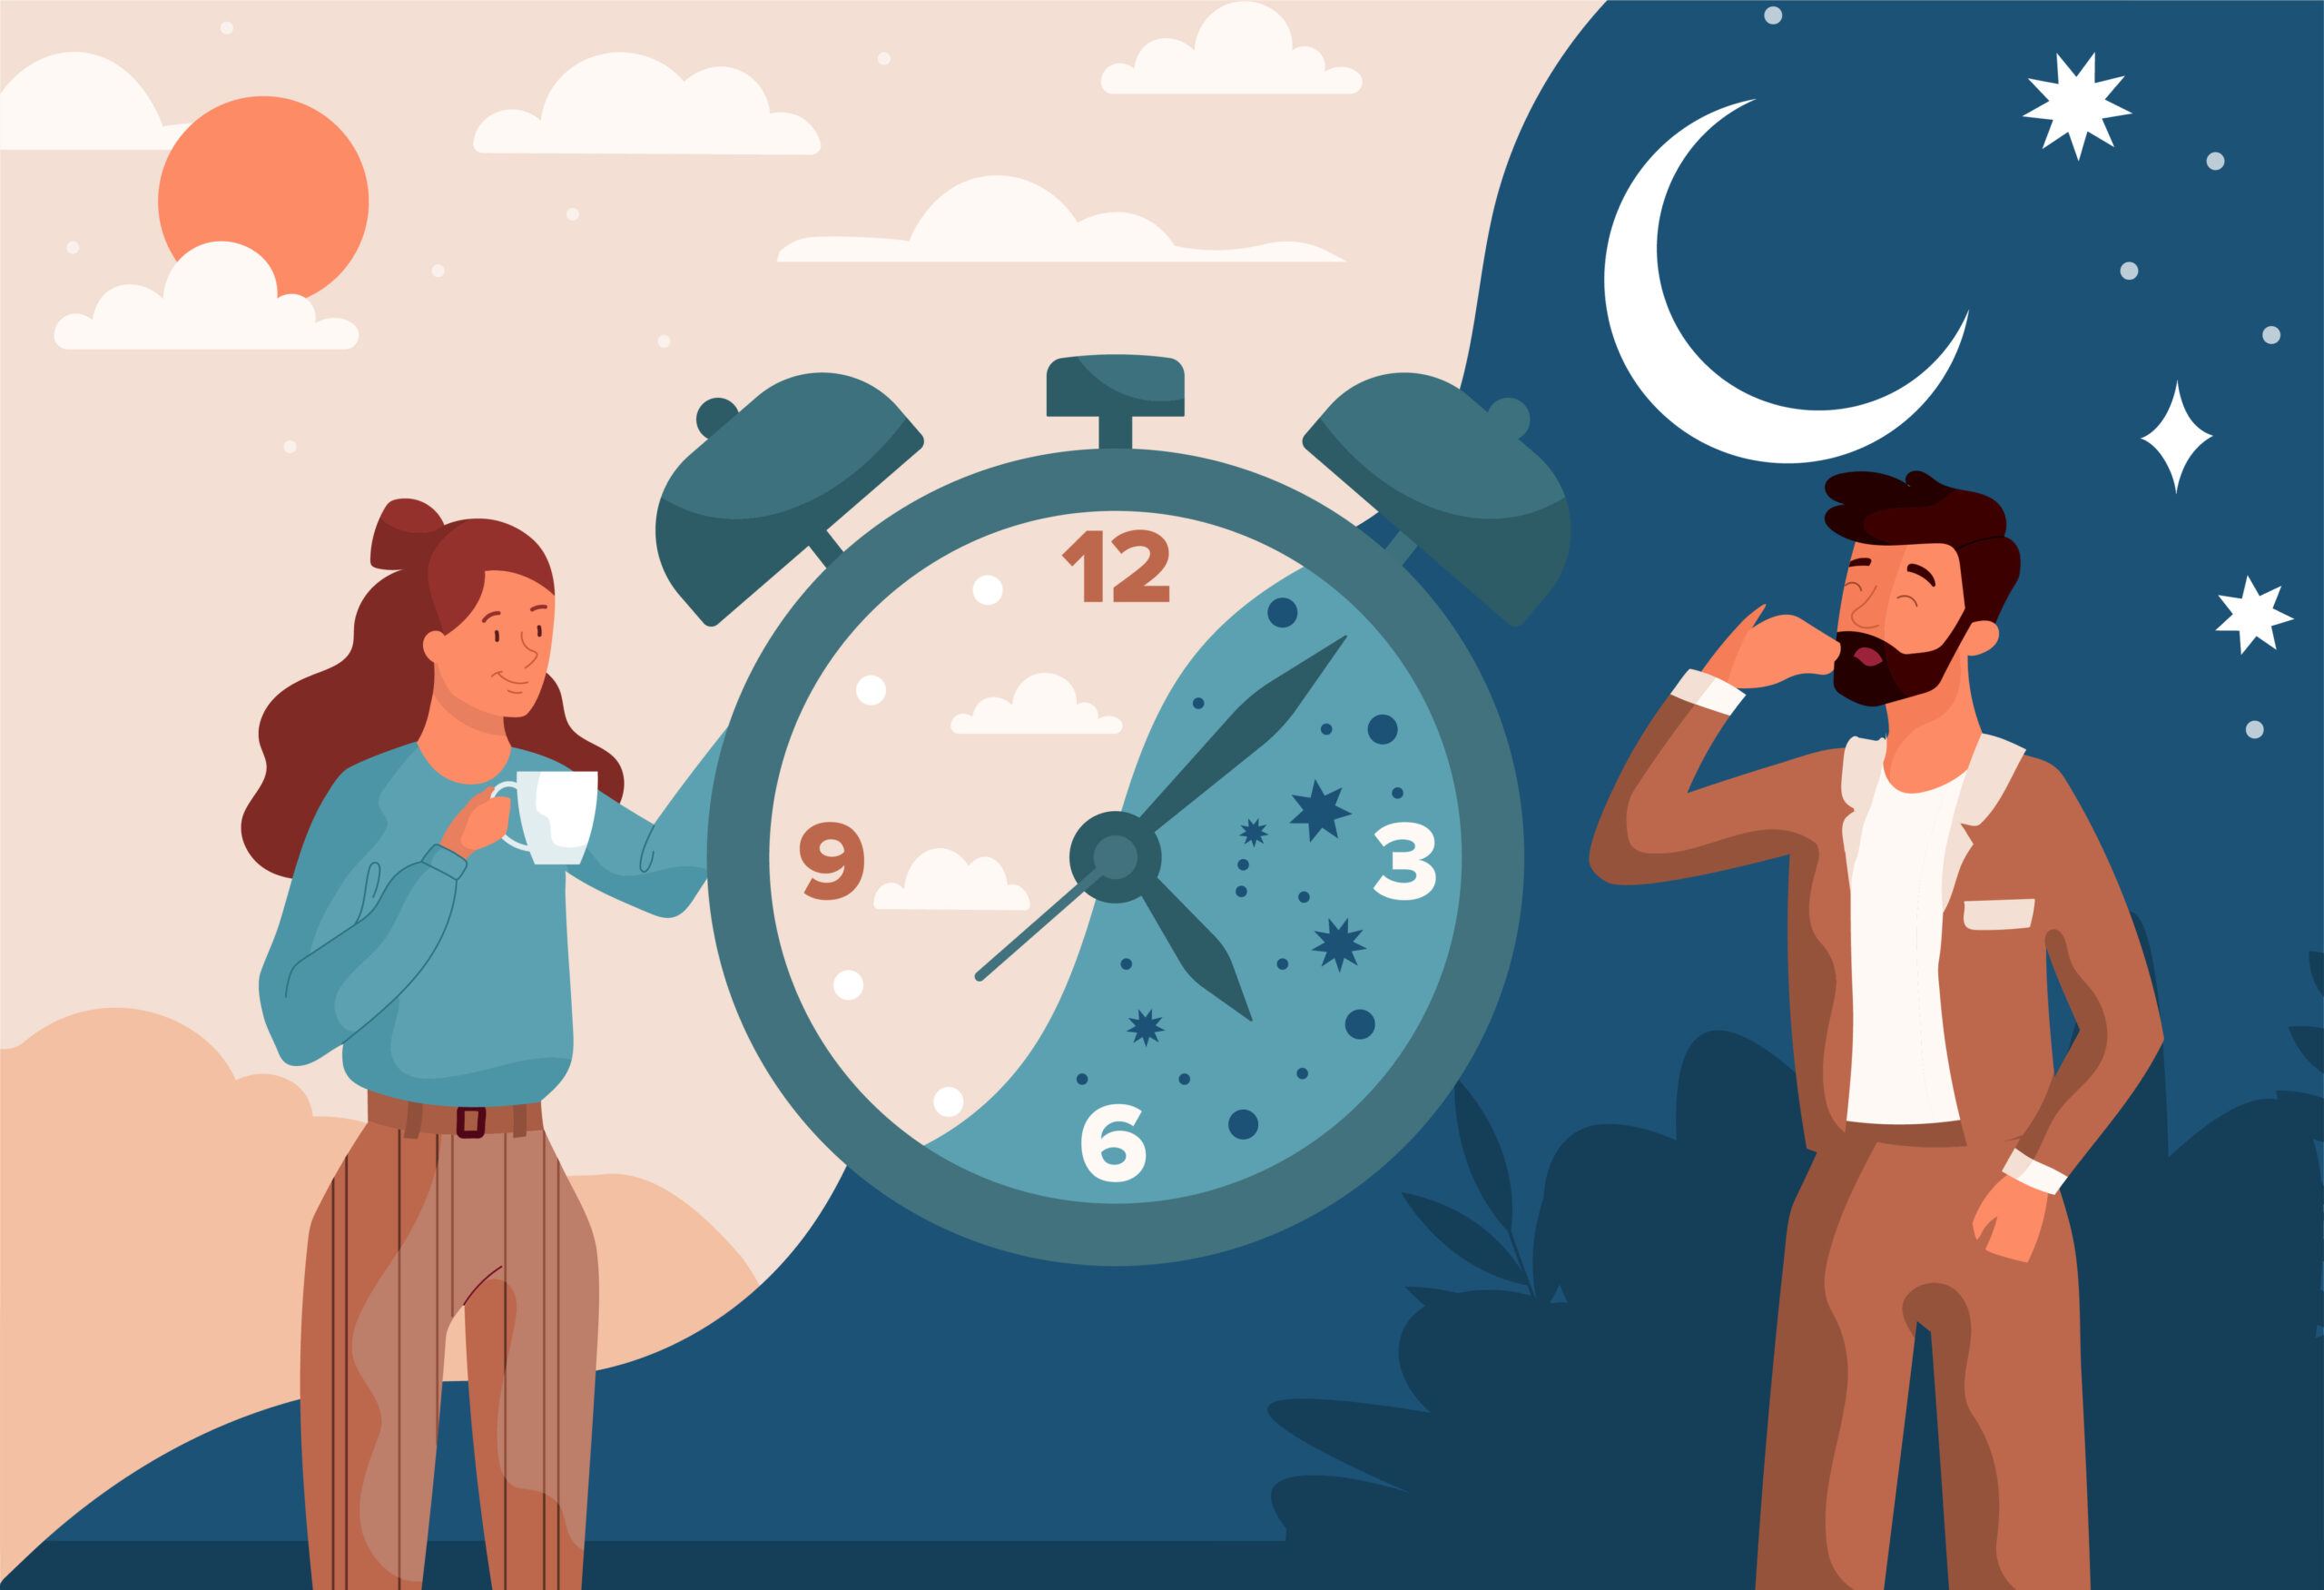 Circadian rhythm concept. Healthy day and night cycle. Man falls asleep, and woman turns off the alarm clock and falls asleep. Cartoon modern flat vector illustration isolated on colorful background